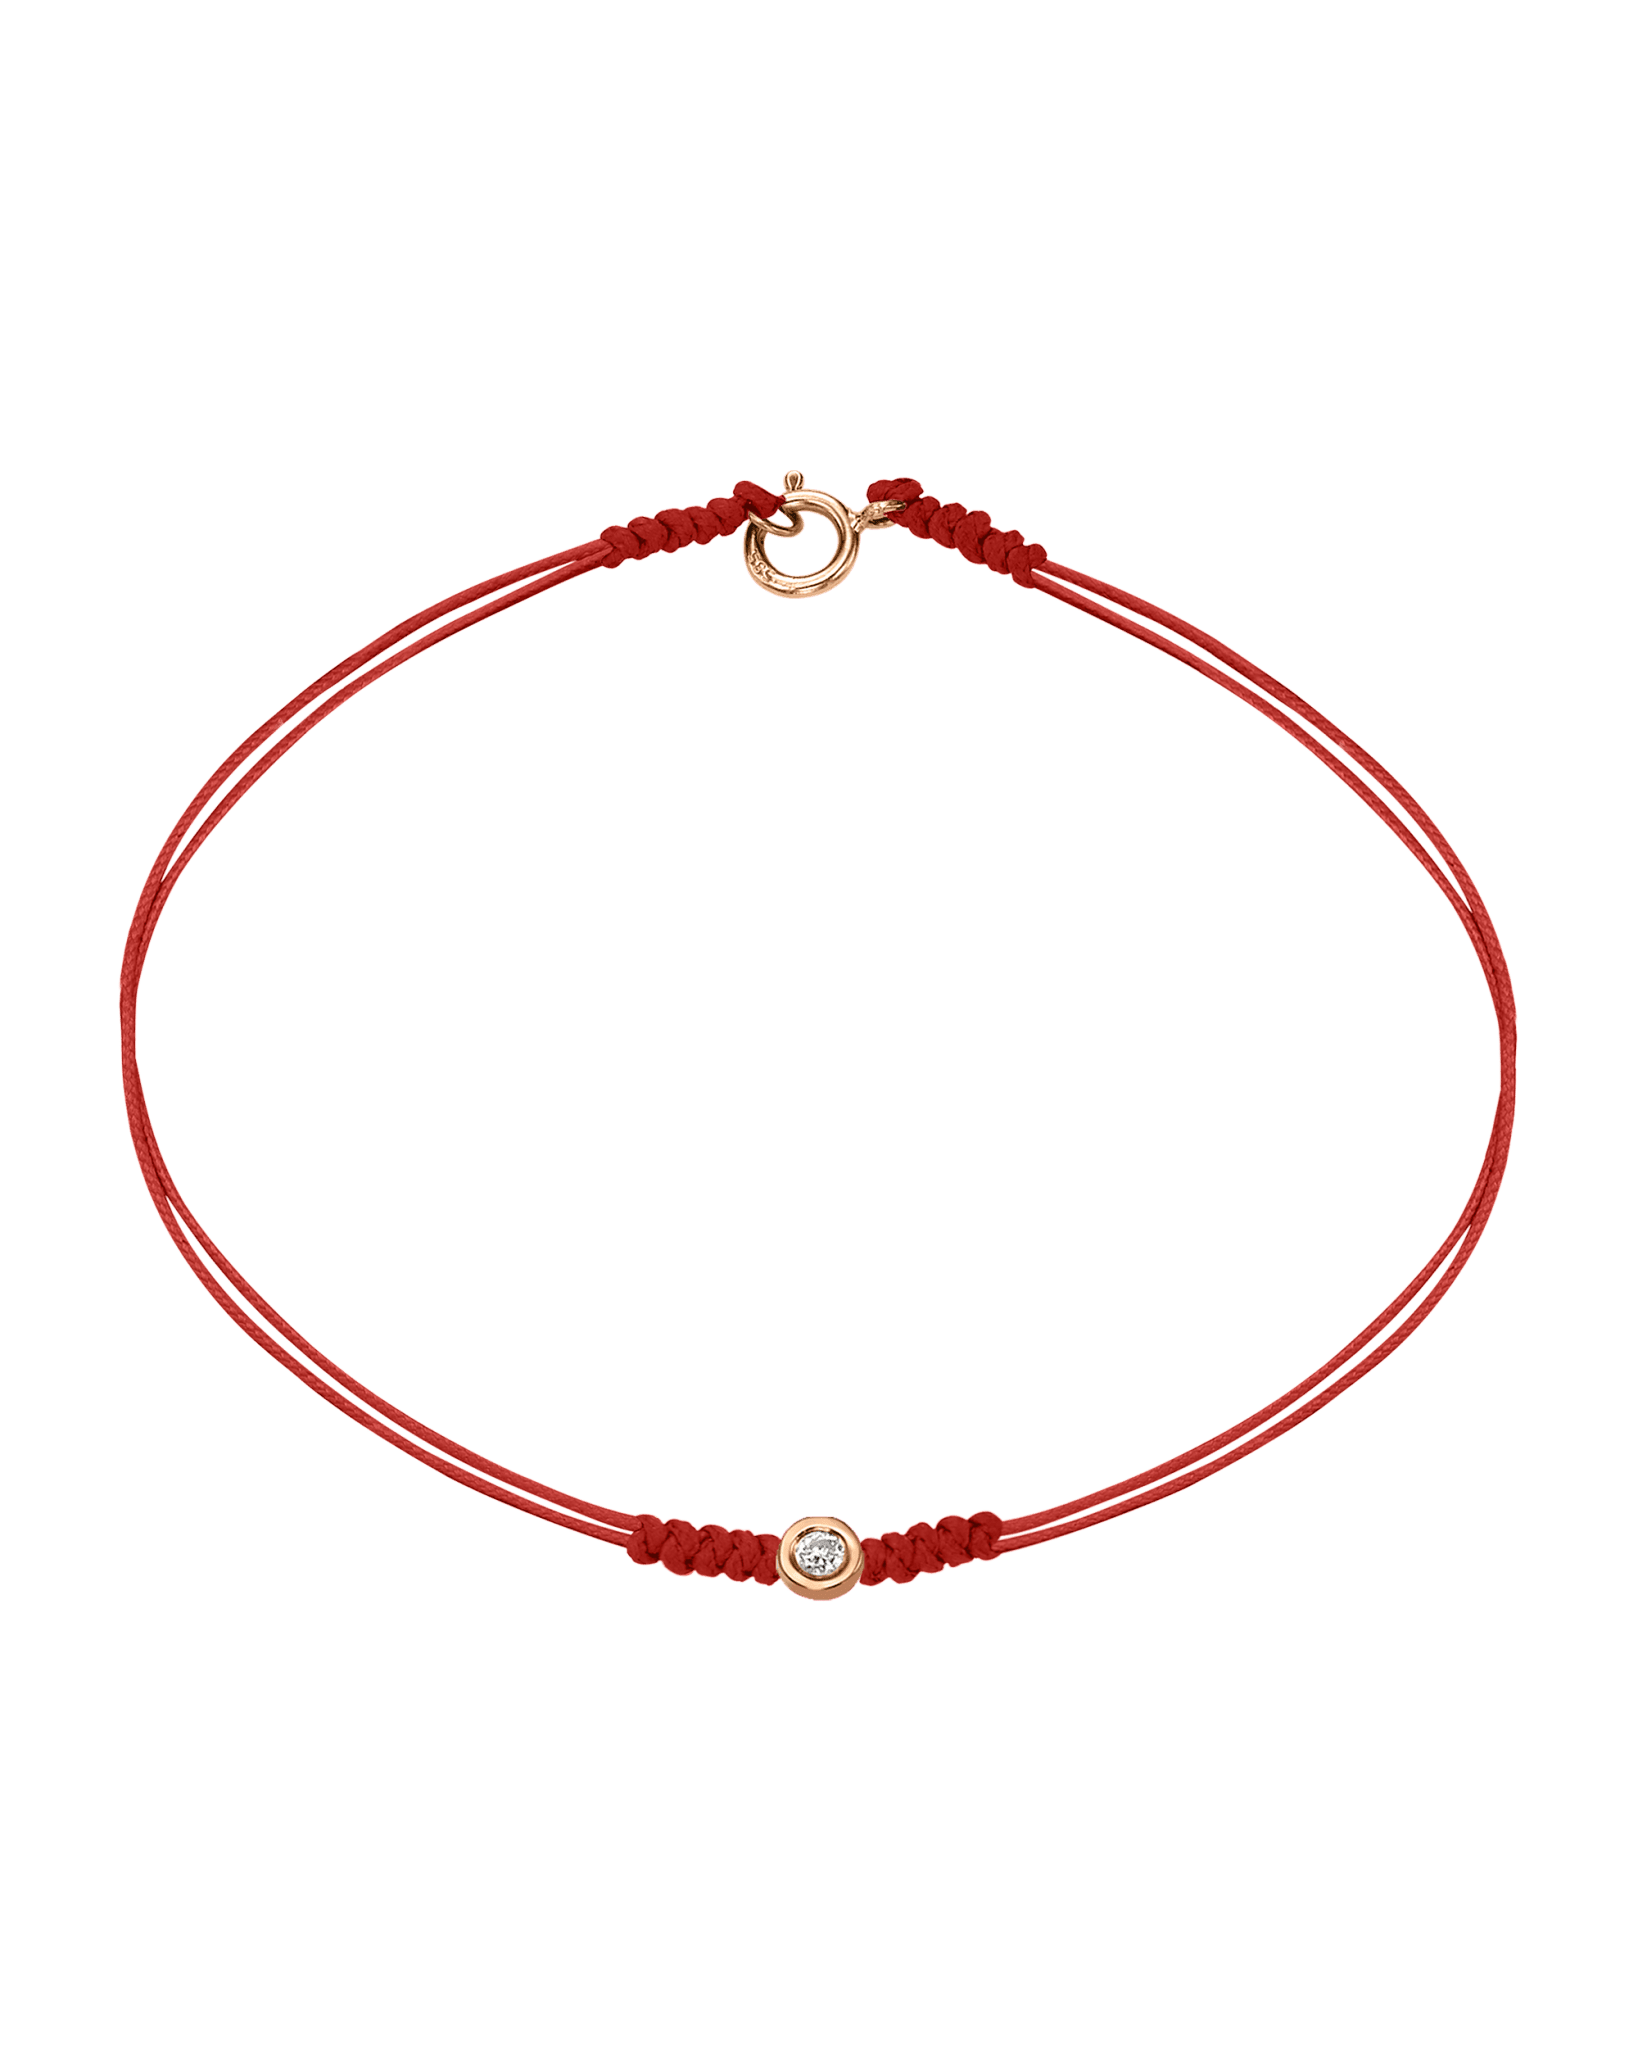 The Classic String of Love with clasp - 14K Rose Gold Bracelets 14K Solid Gold Red Small: 0.03ct Small - 6 Inches (15.5cm)